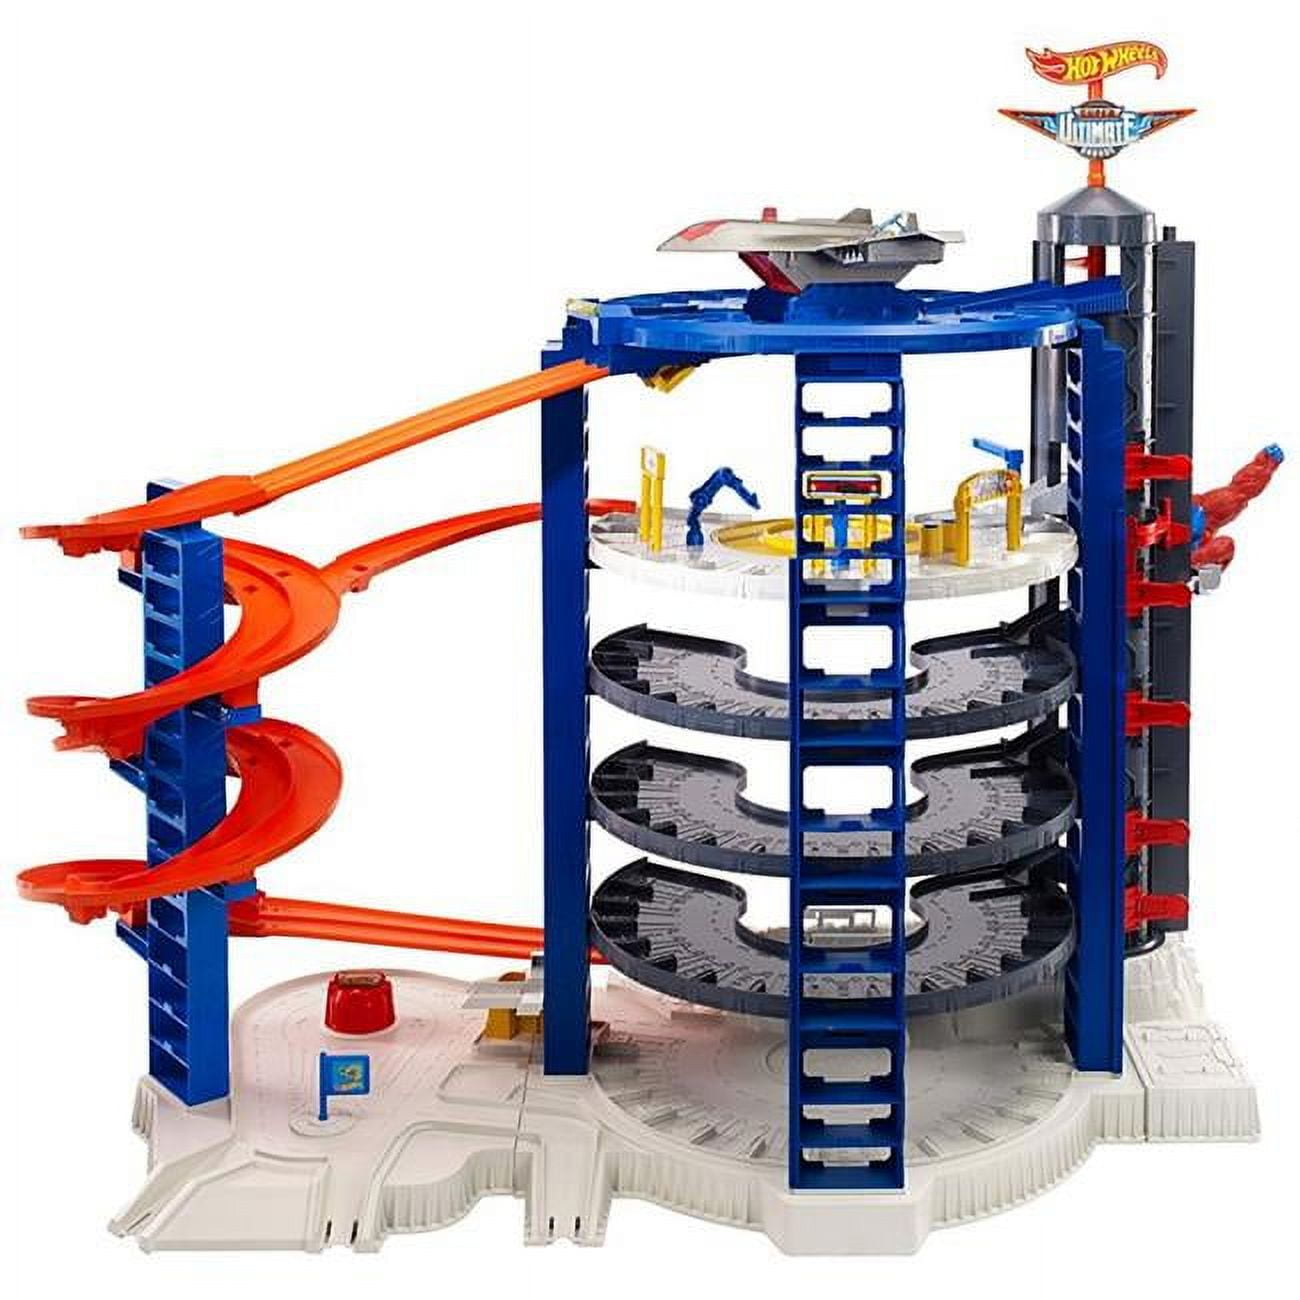 s Sale on the Hot Wheels Super Ultimate Garage is So Good – SheKnows